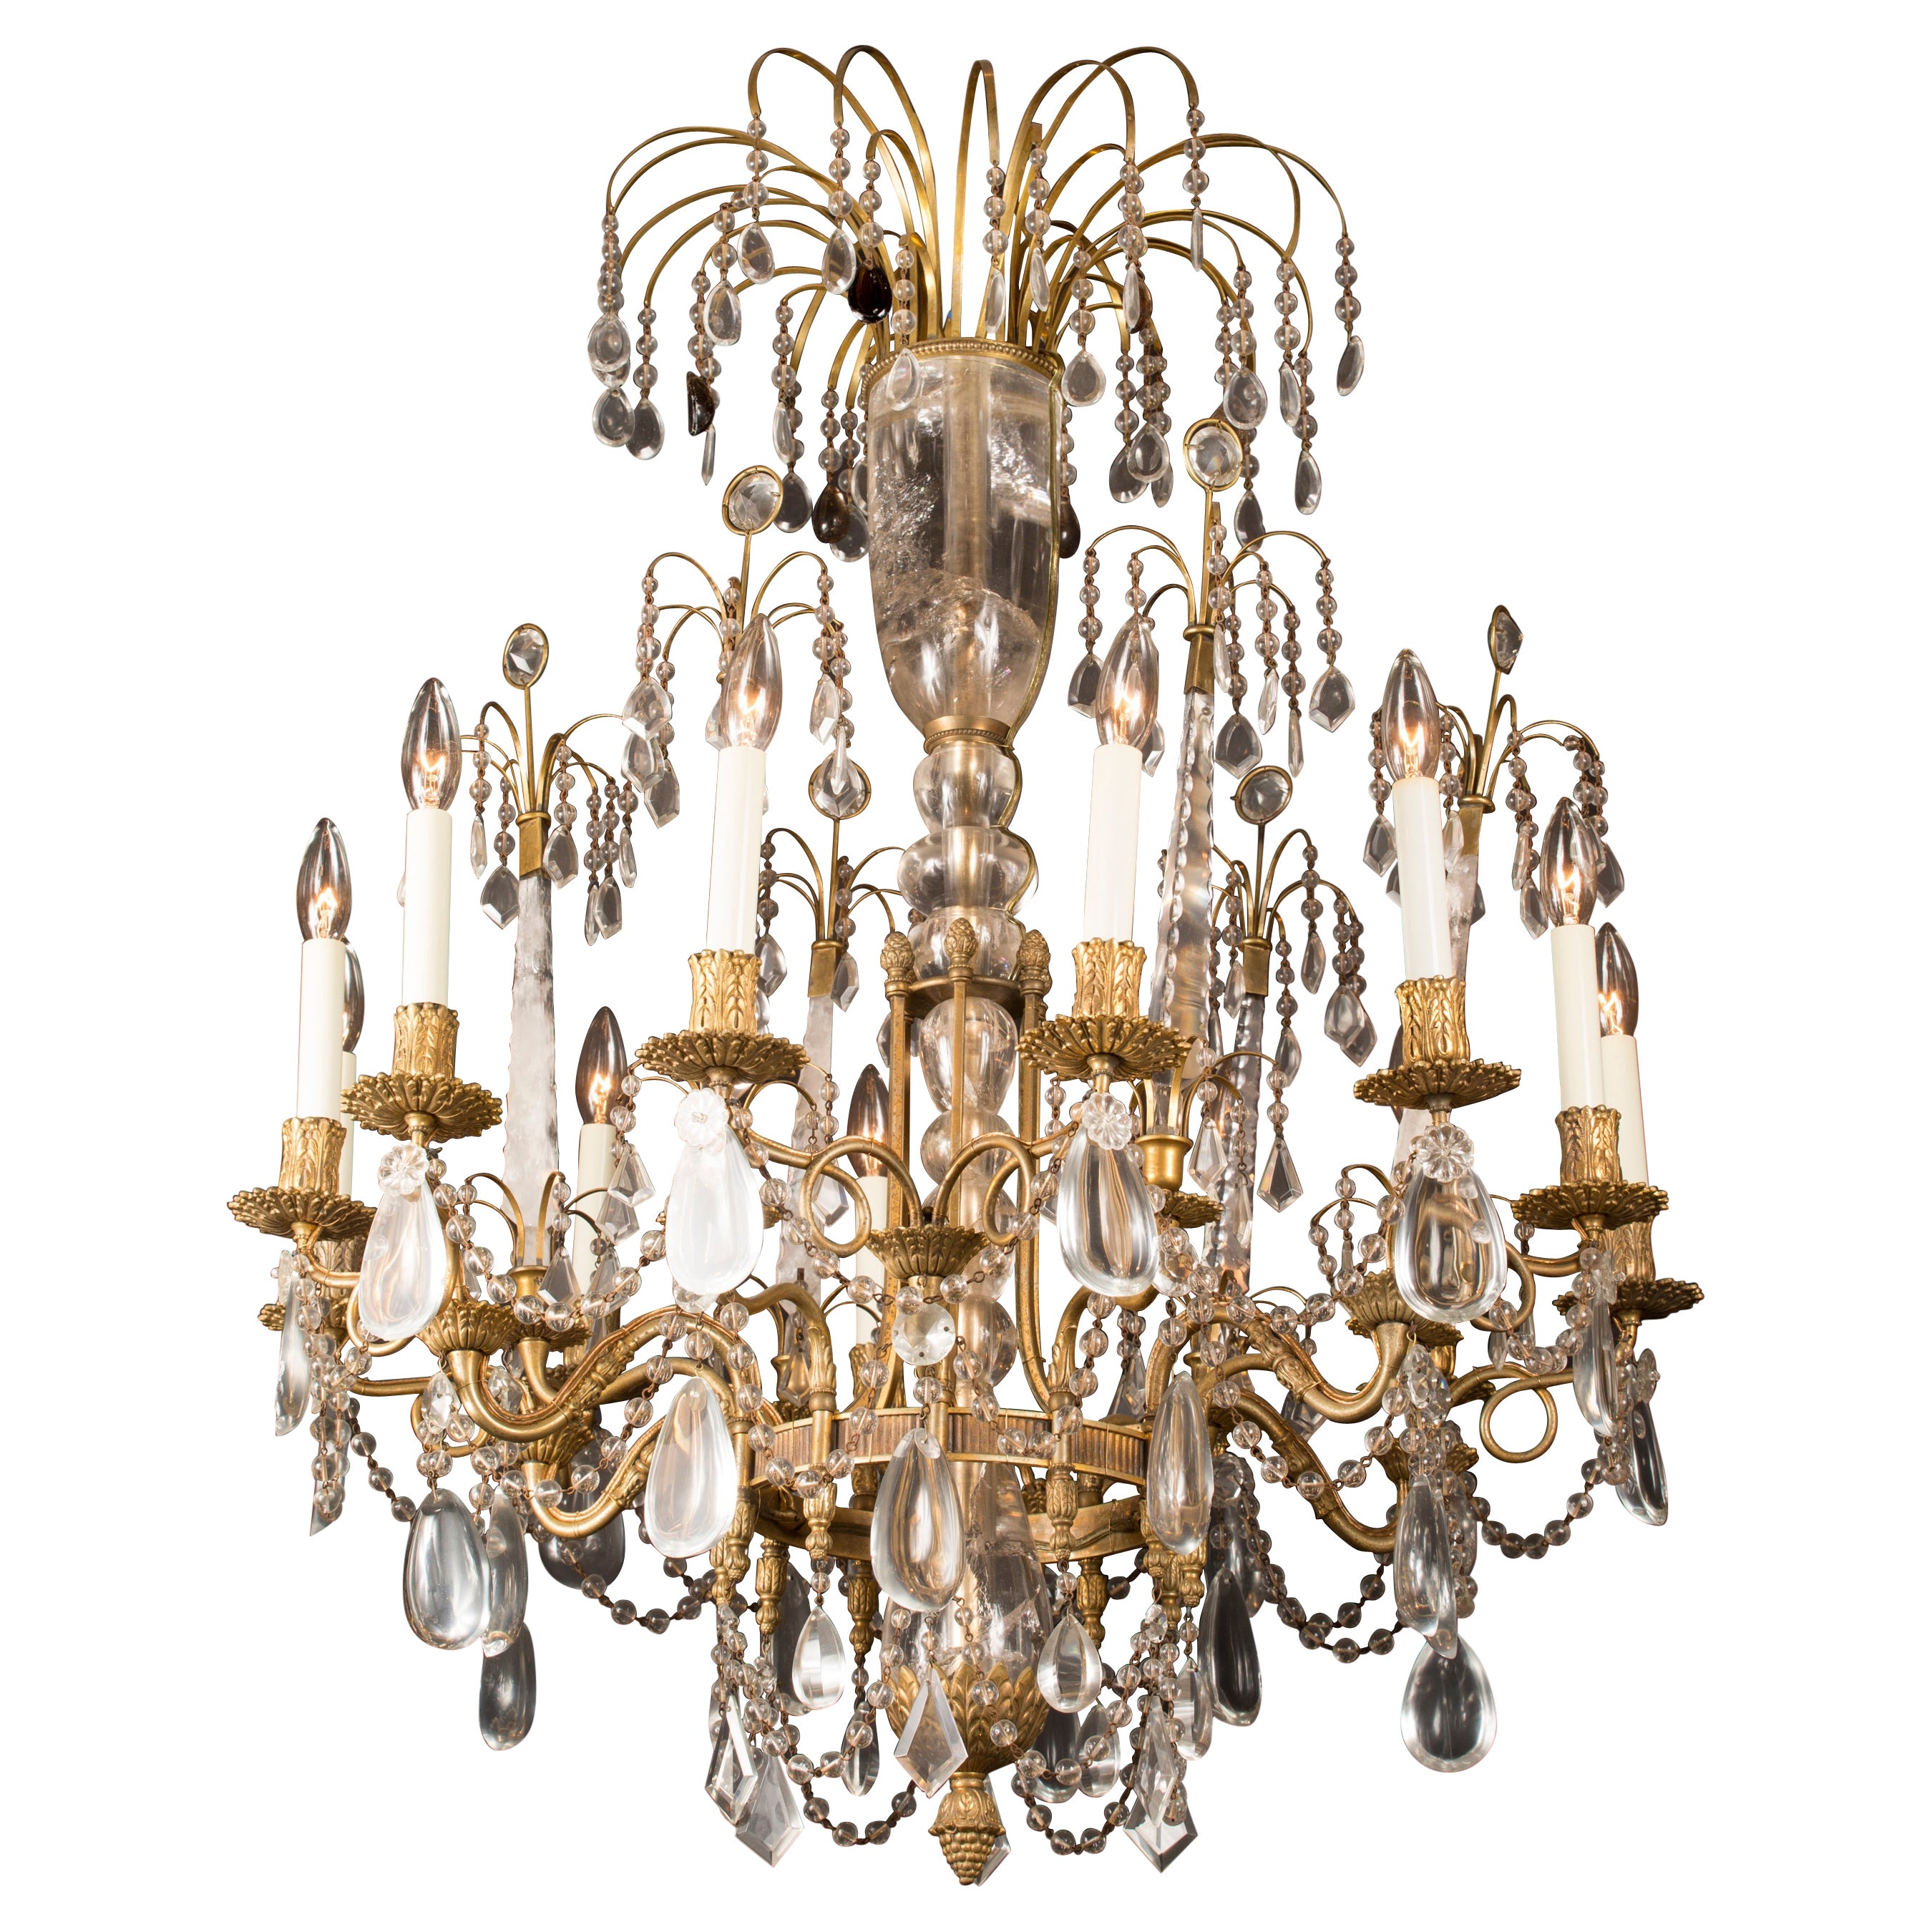 Rock Crystal and Bronze D’Ore Chandelier, Russian 19th Century For Sale